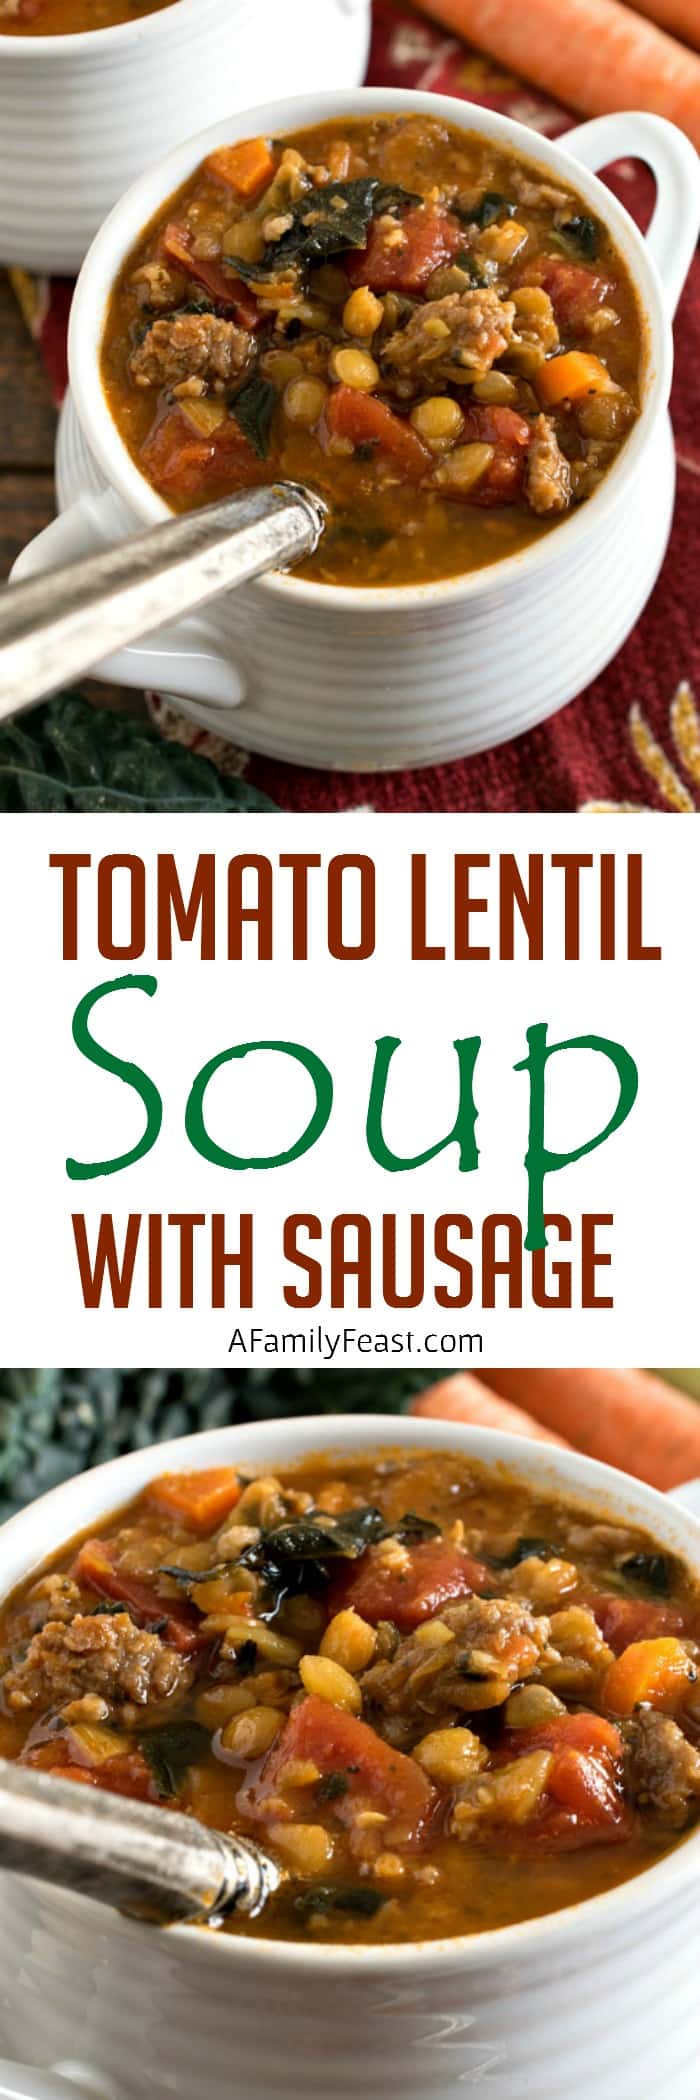 Tomato Lentil Soup with Sausage - Delicious comfort food in a bowl!